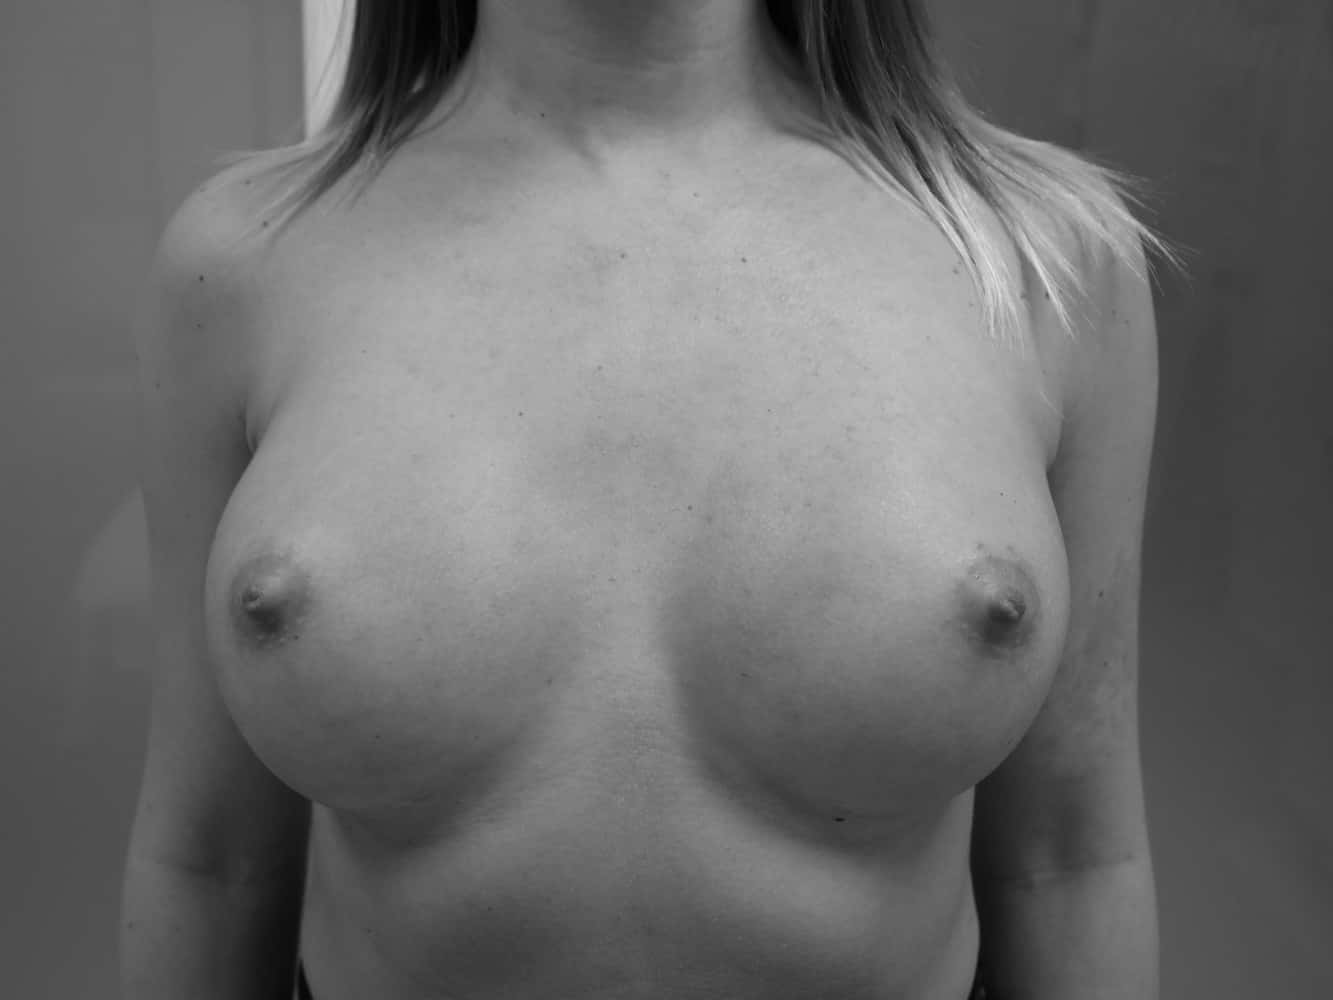 Breast enlargement - after surgery